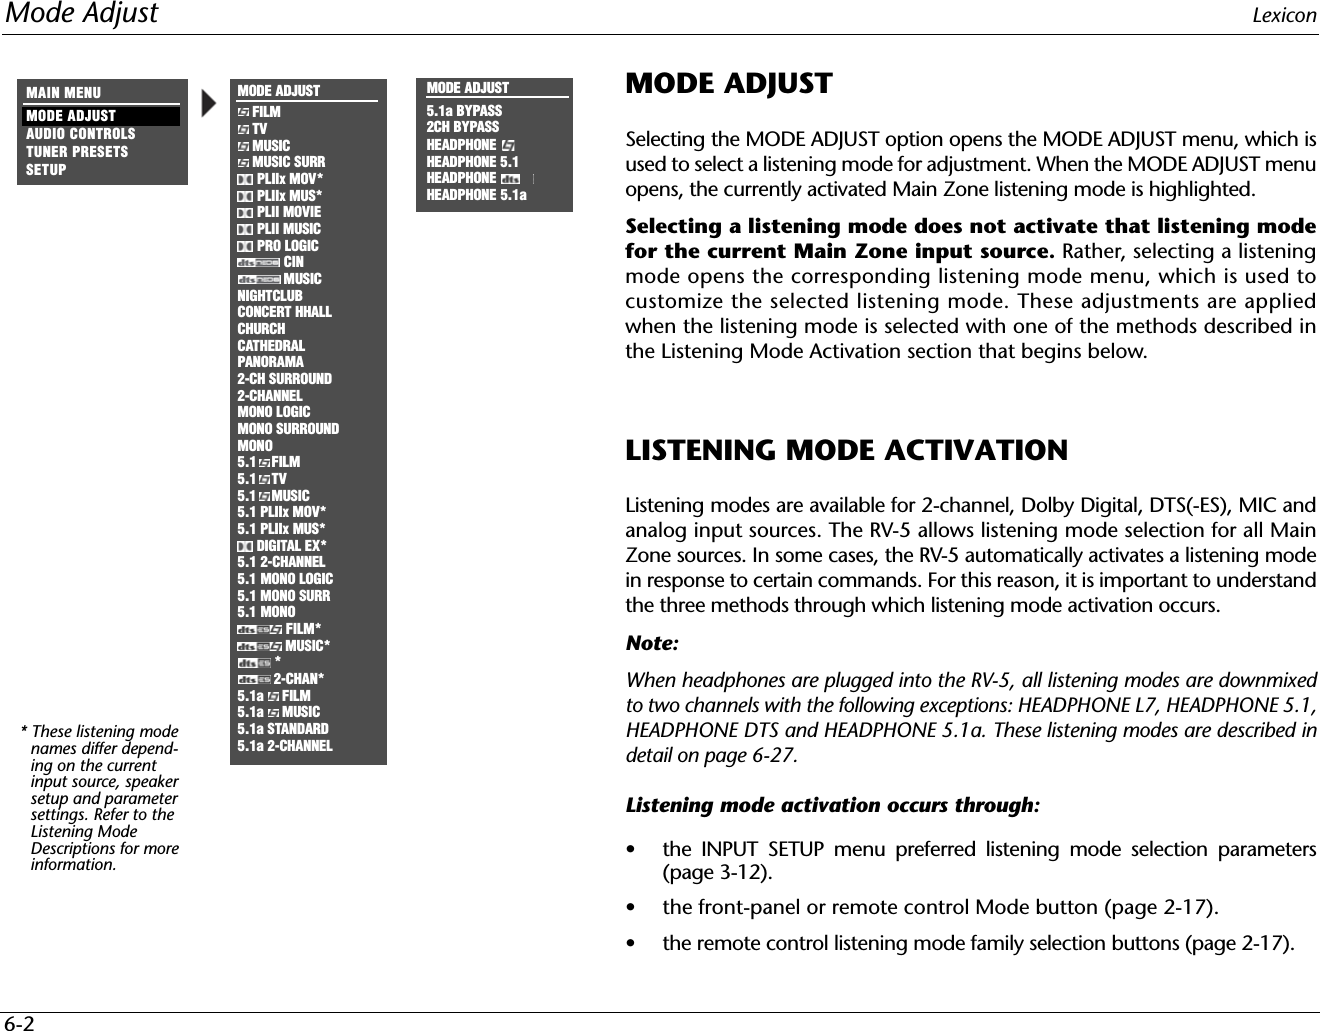 Mode Adjust Lexicon6-2MODE ADJUSTSelecting the MODE ADJUST option opens the MODE ADJUST menu, which isused to select a listening mode for adjustment. When the MODE ADJUST menuopens, the currently activated Main Zone listening mode is highlighted.Selecting a listening mode does not activate that listening modefor the current Main Zone input source. Rather, selecting a listeningmode opens the corresponding listening mode menu, which is used tocustomize the selected listening mode. These adjustments are appliedwhen the listening mode is selected with one of the methods described inthe Listening Mode Activation section that begins below.LISTENING MODE ACTIVATIONListening modes are available for 2-channel, Dolby Digital, DTS(-ES), MIC andanalog input sources. The RV-5 allows listening mode selection for all MainZone sources. In some cases, the RV-5 automatically activates a listening modein response to certain commands. For this reason, it is important to understandthe three methods through which listening mode activation occurs.Note:When headphones are plugged into the RV-5, all listening modes are downmixedto two channels with the following exceptions: HEADPHONE L7, HEADPHONE 5.1,HEADPHONE DTS and HEADPHONE 5.1a. These listening modes are described indetail on page 6-27.Listening mode activation occurs through:• the INPUT SETUP menu preferred listening mode selection parameters(page 3-12).• the front-panel or remote control Mode button (page 2-17).• the remote control listening mode family selection buttons (page 2-17).MAIN MENUMODE ADJUSTAUDIO CONTROLSTUNER PRESETS* These listening mode names differ depend-ing on the current input source, speaker setup and parameter settings. Refer to the Listening Mode Descriptions for more information.SETUPMODE ADJUST5.1a BYPASS2CH BYPASSHEADPHONE HEADPHONE 5.1HEADPHONE HEADPHONE 5.1aMODE ADJUSTFILMTVMUSICMUSIC SURRPLIIx MOV*PLIIx MUS*PLII MOVIEPLII MUSICPRO LOGICCINMUSICNIGHTCLUBCONCERT HHALLCHURCHCATHEDRALPANORAMA2-CH SURROUND2-CHANNELMONO LOGICMONO SURROUNDMONO5.1 FILM5.1 TV5.1 MUSIC5.1 PLIIx MOV*5.1 PLIIx MUS*DIGITAL EX*5.1 2-CHANNEL5.1 MONO LOGIC5.1 MONO SURR5.1 MONOFILM*MUSIC**2-CHAN*5.1a  FILM5.1a  MUSIC5.1a STANDARD5.1a 2-CHANNEL